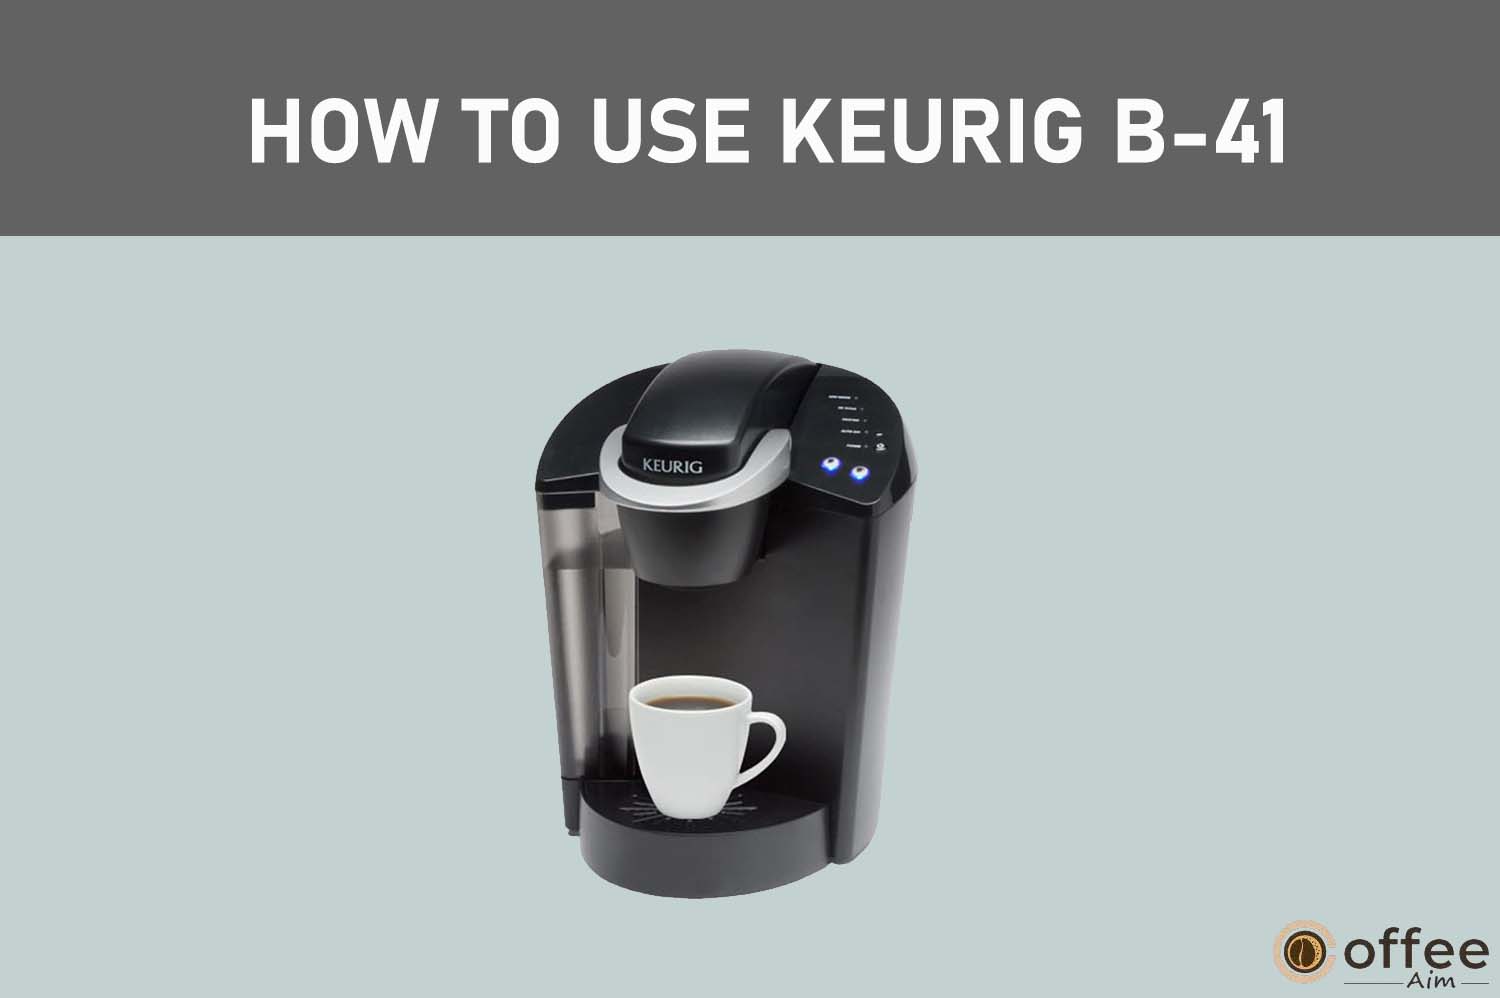 Feature image for the article "How To Use Keurig B-41"